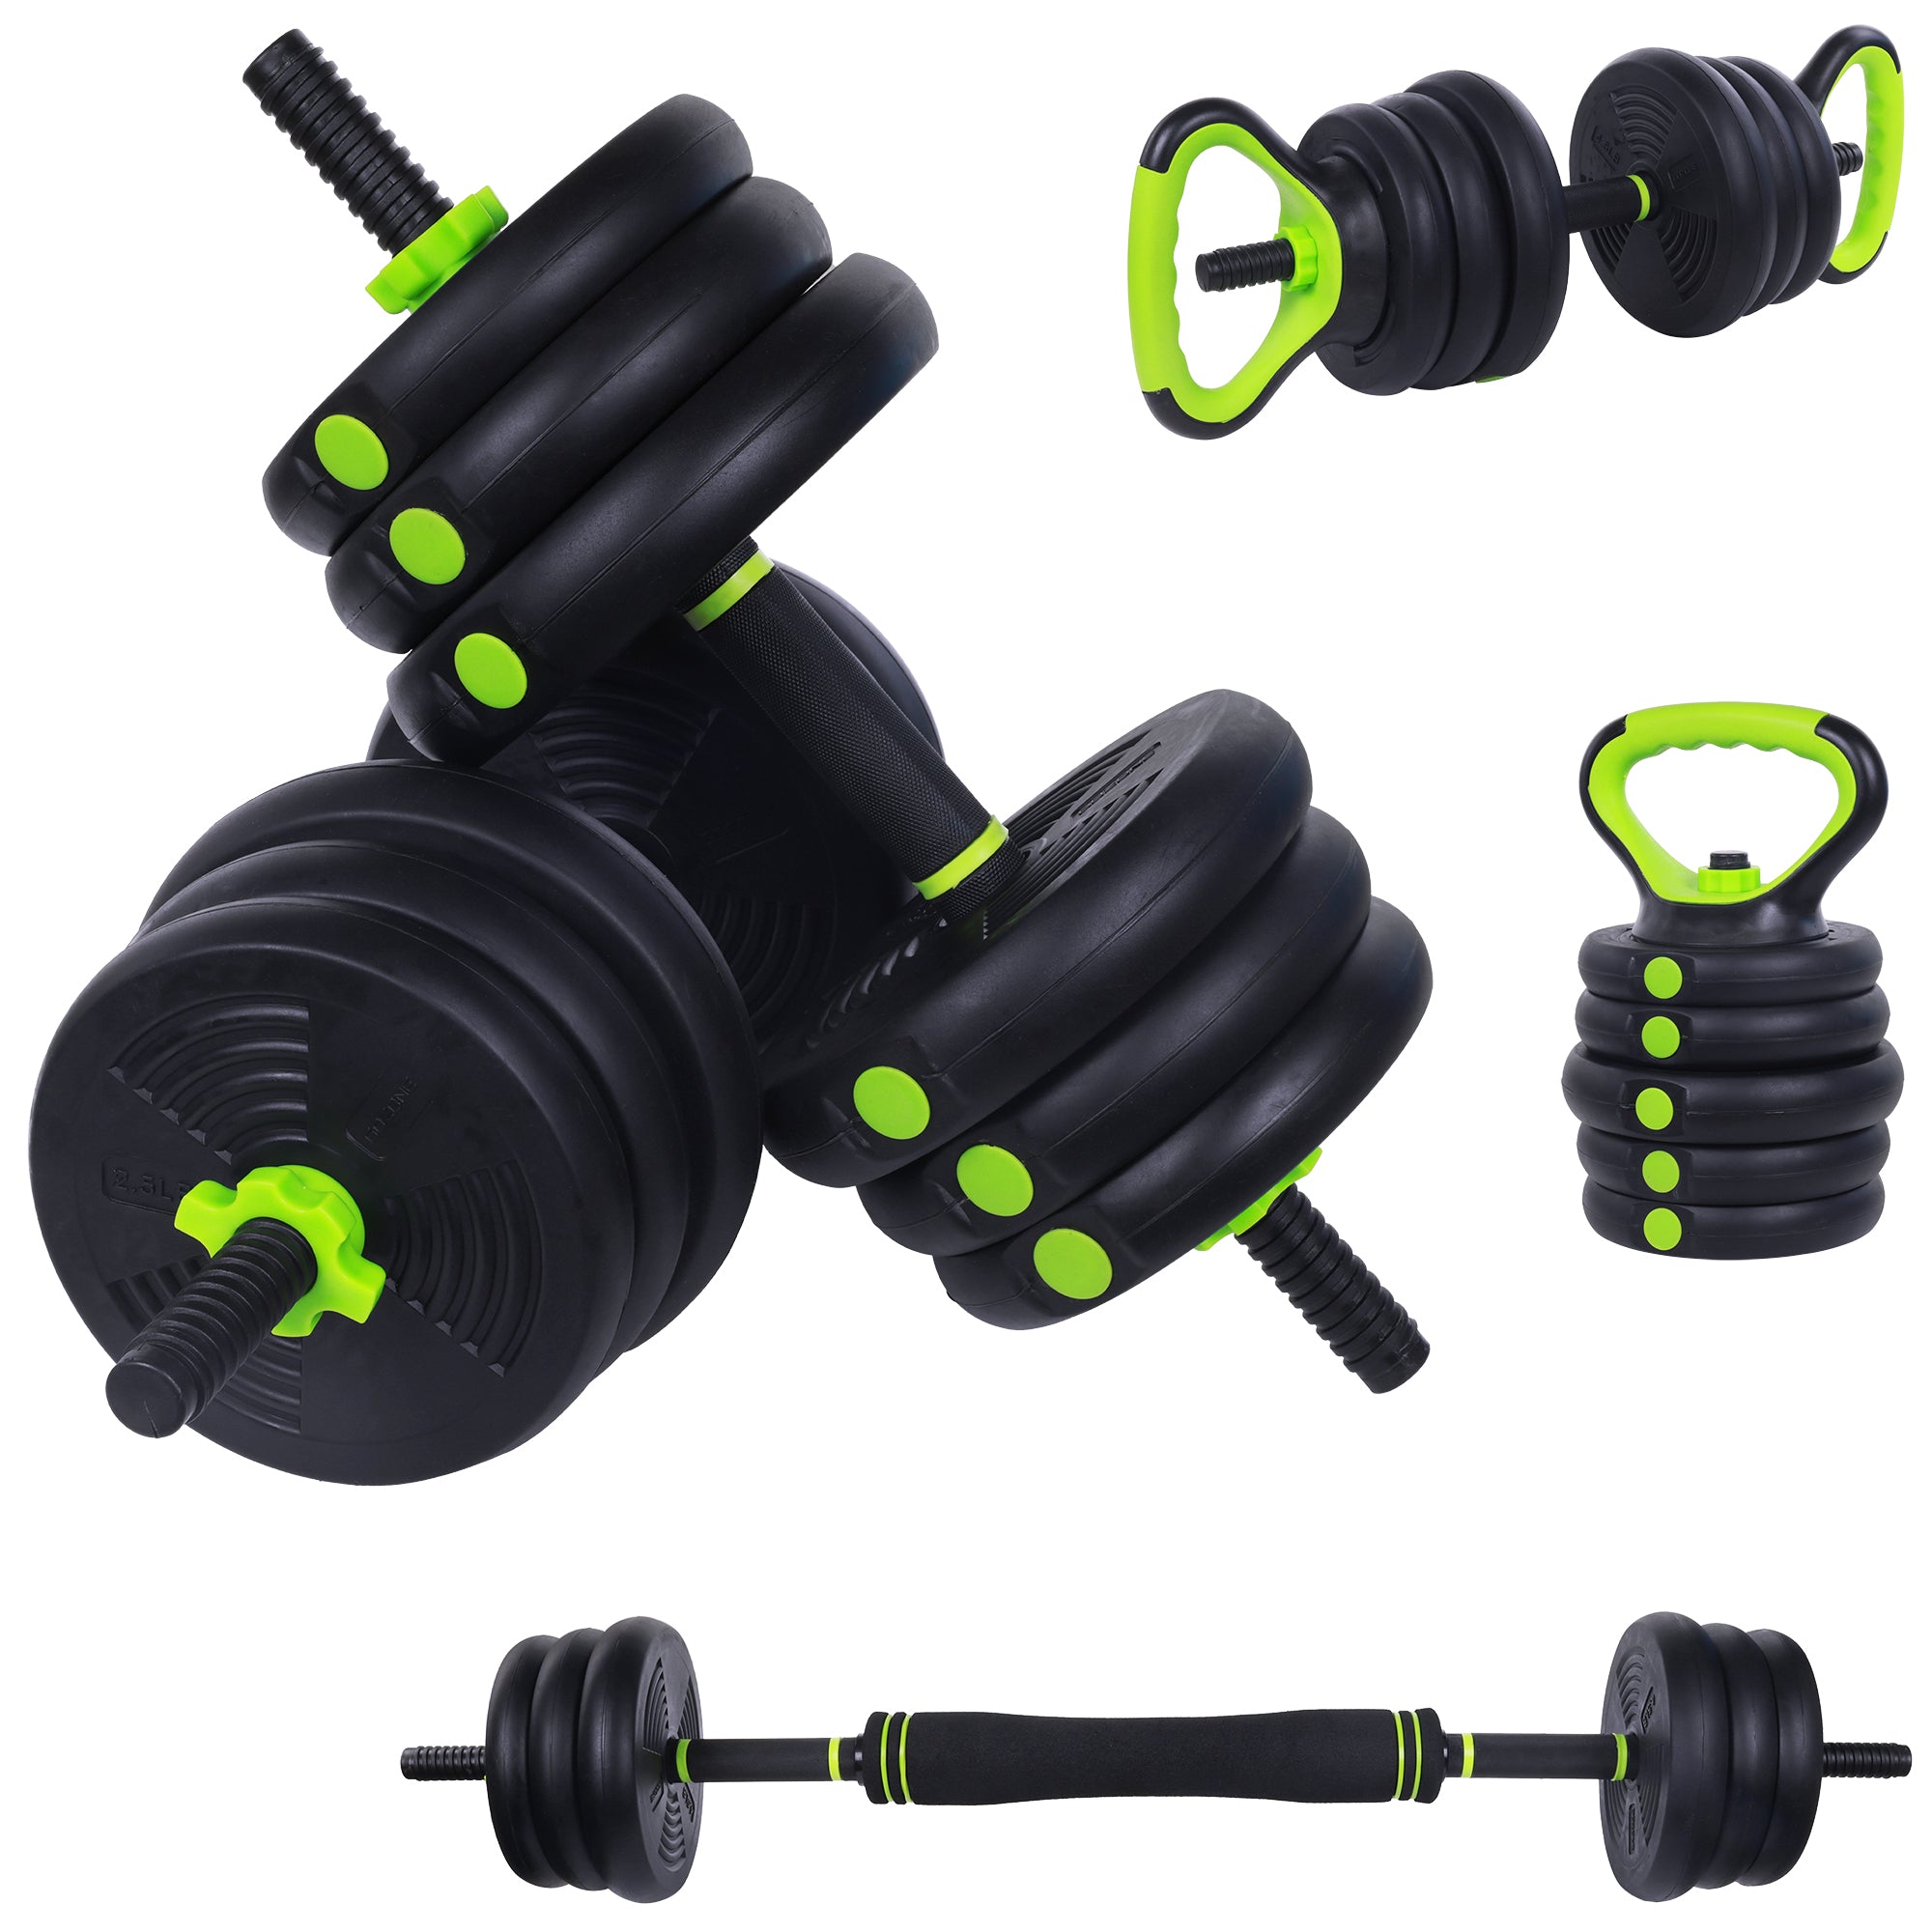 Bluelander Set of Weights for Exercise at Home, 8 Discs of Different  Weights, 4 Bars of 2 Different Longs, 2 Bar Locks, Exercise Weights, Weight  Kit, Adjustable Weights, Plates -  Canada